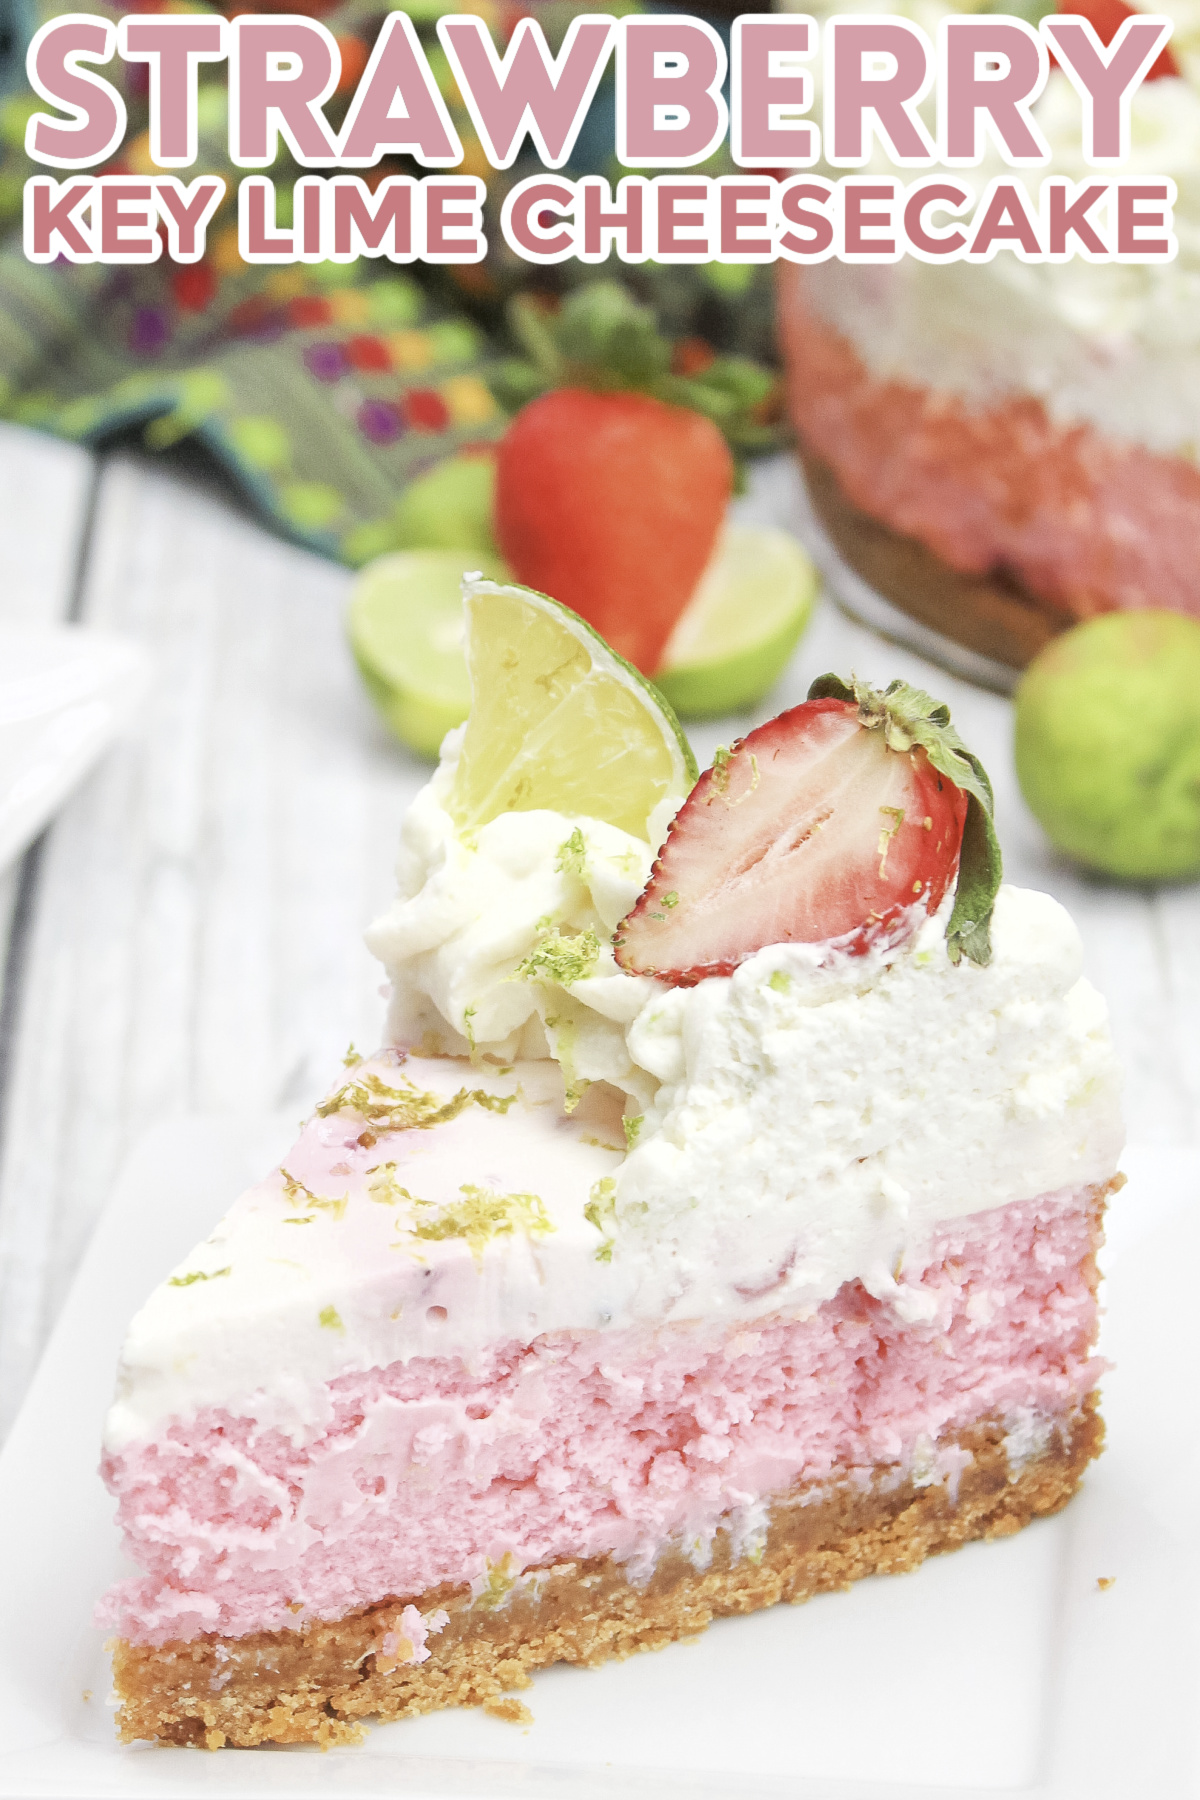 Whip up this delicious strawberry key lime cheesecake recipe complete with graham cracker crust, creamy filling, and sour cream topping.